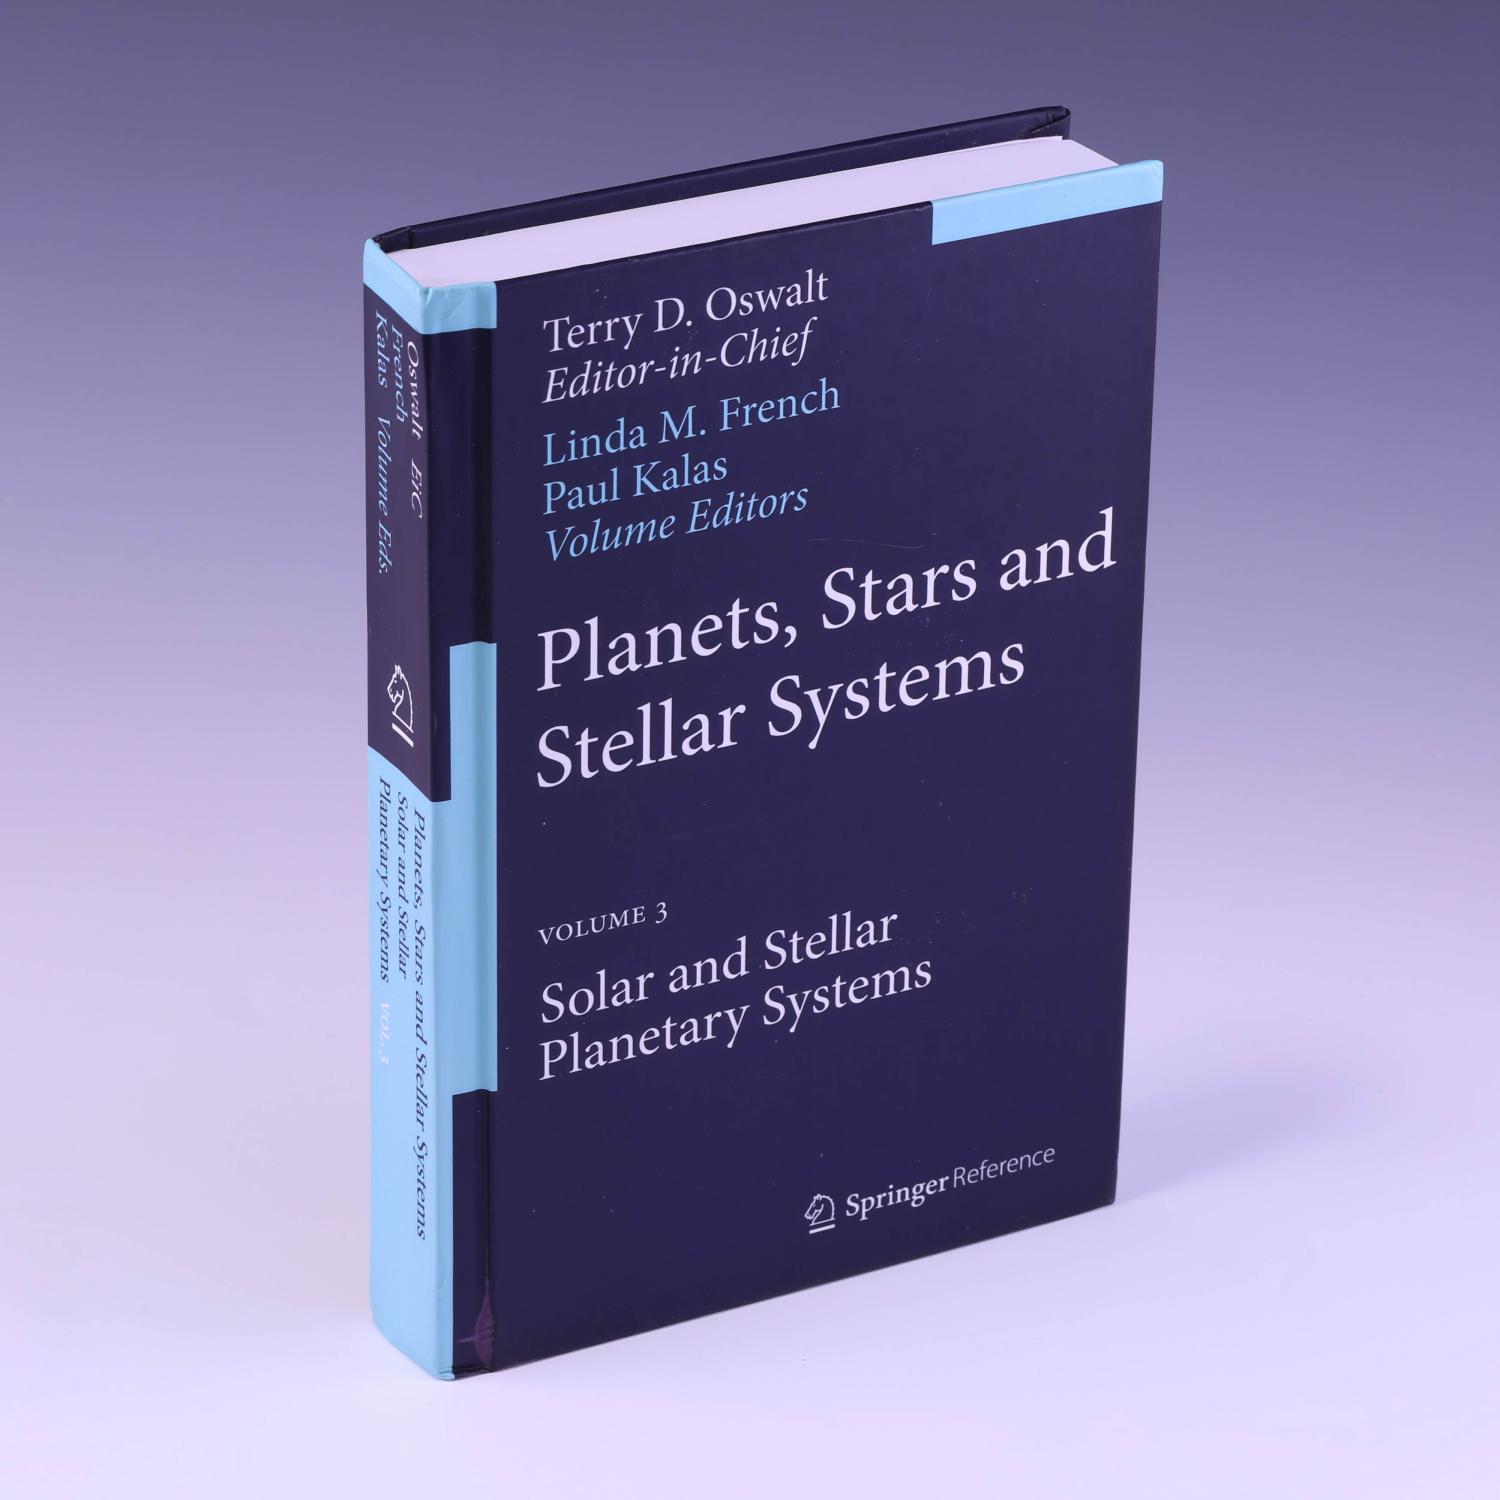 Planets, Stars and Stellar Systems: Volume 3: Solar and Stellar Planetary Systems